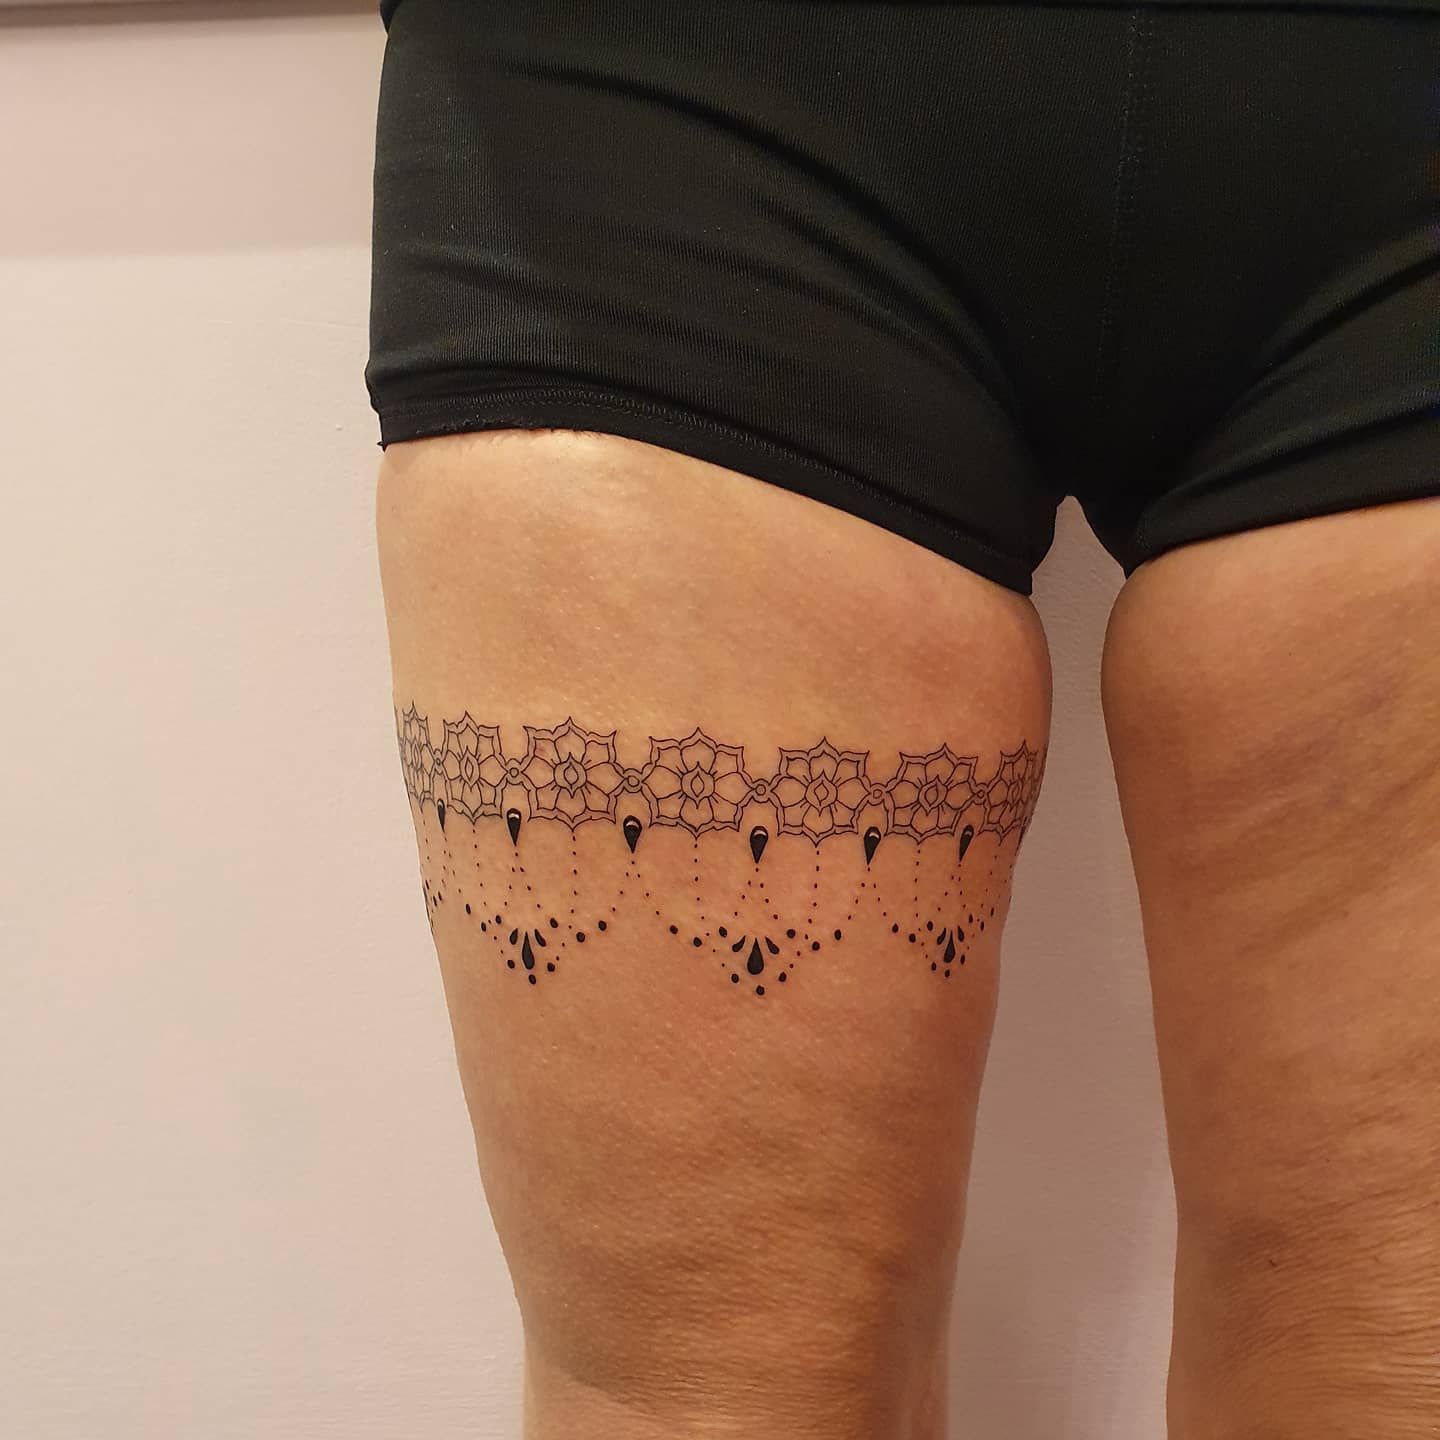 Thigh Tattoos Meaning: The Deeper Meanings Behind Popular Tattoo Designs